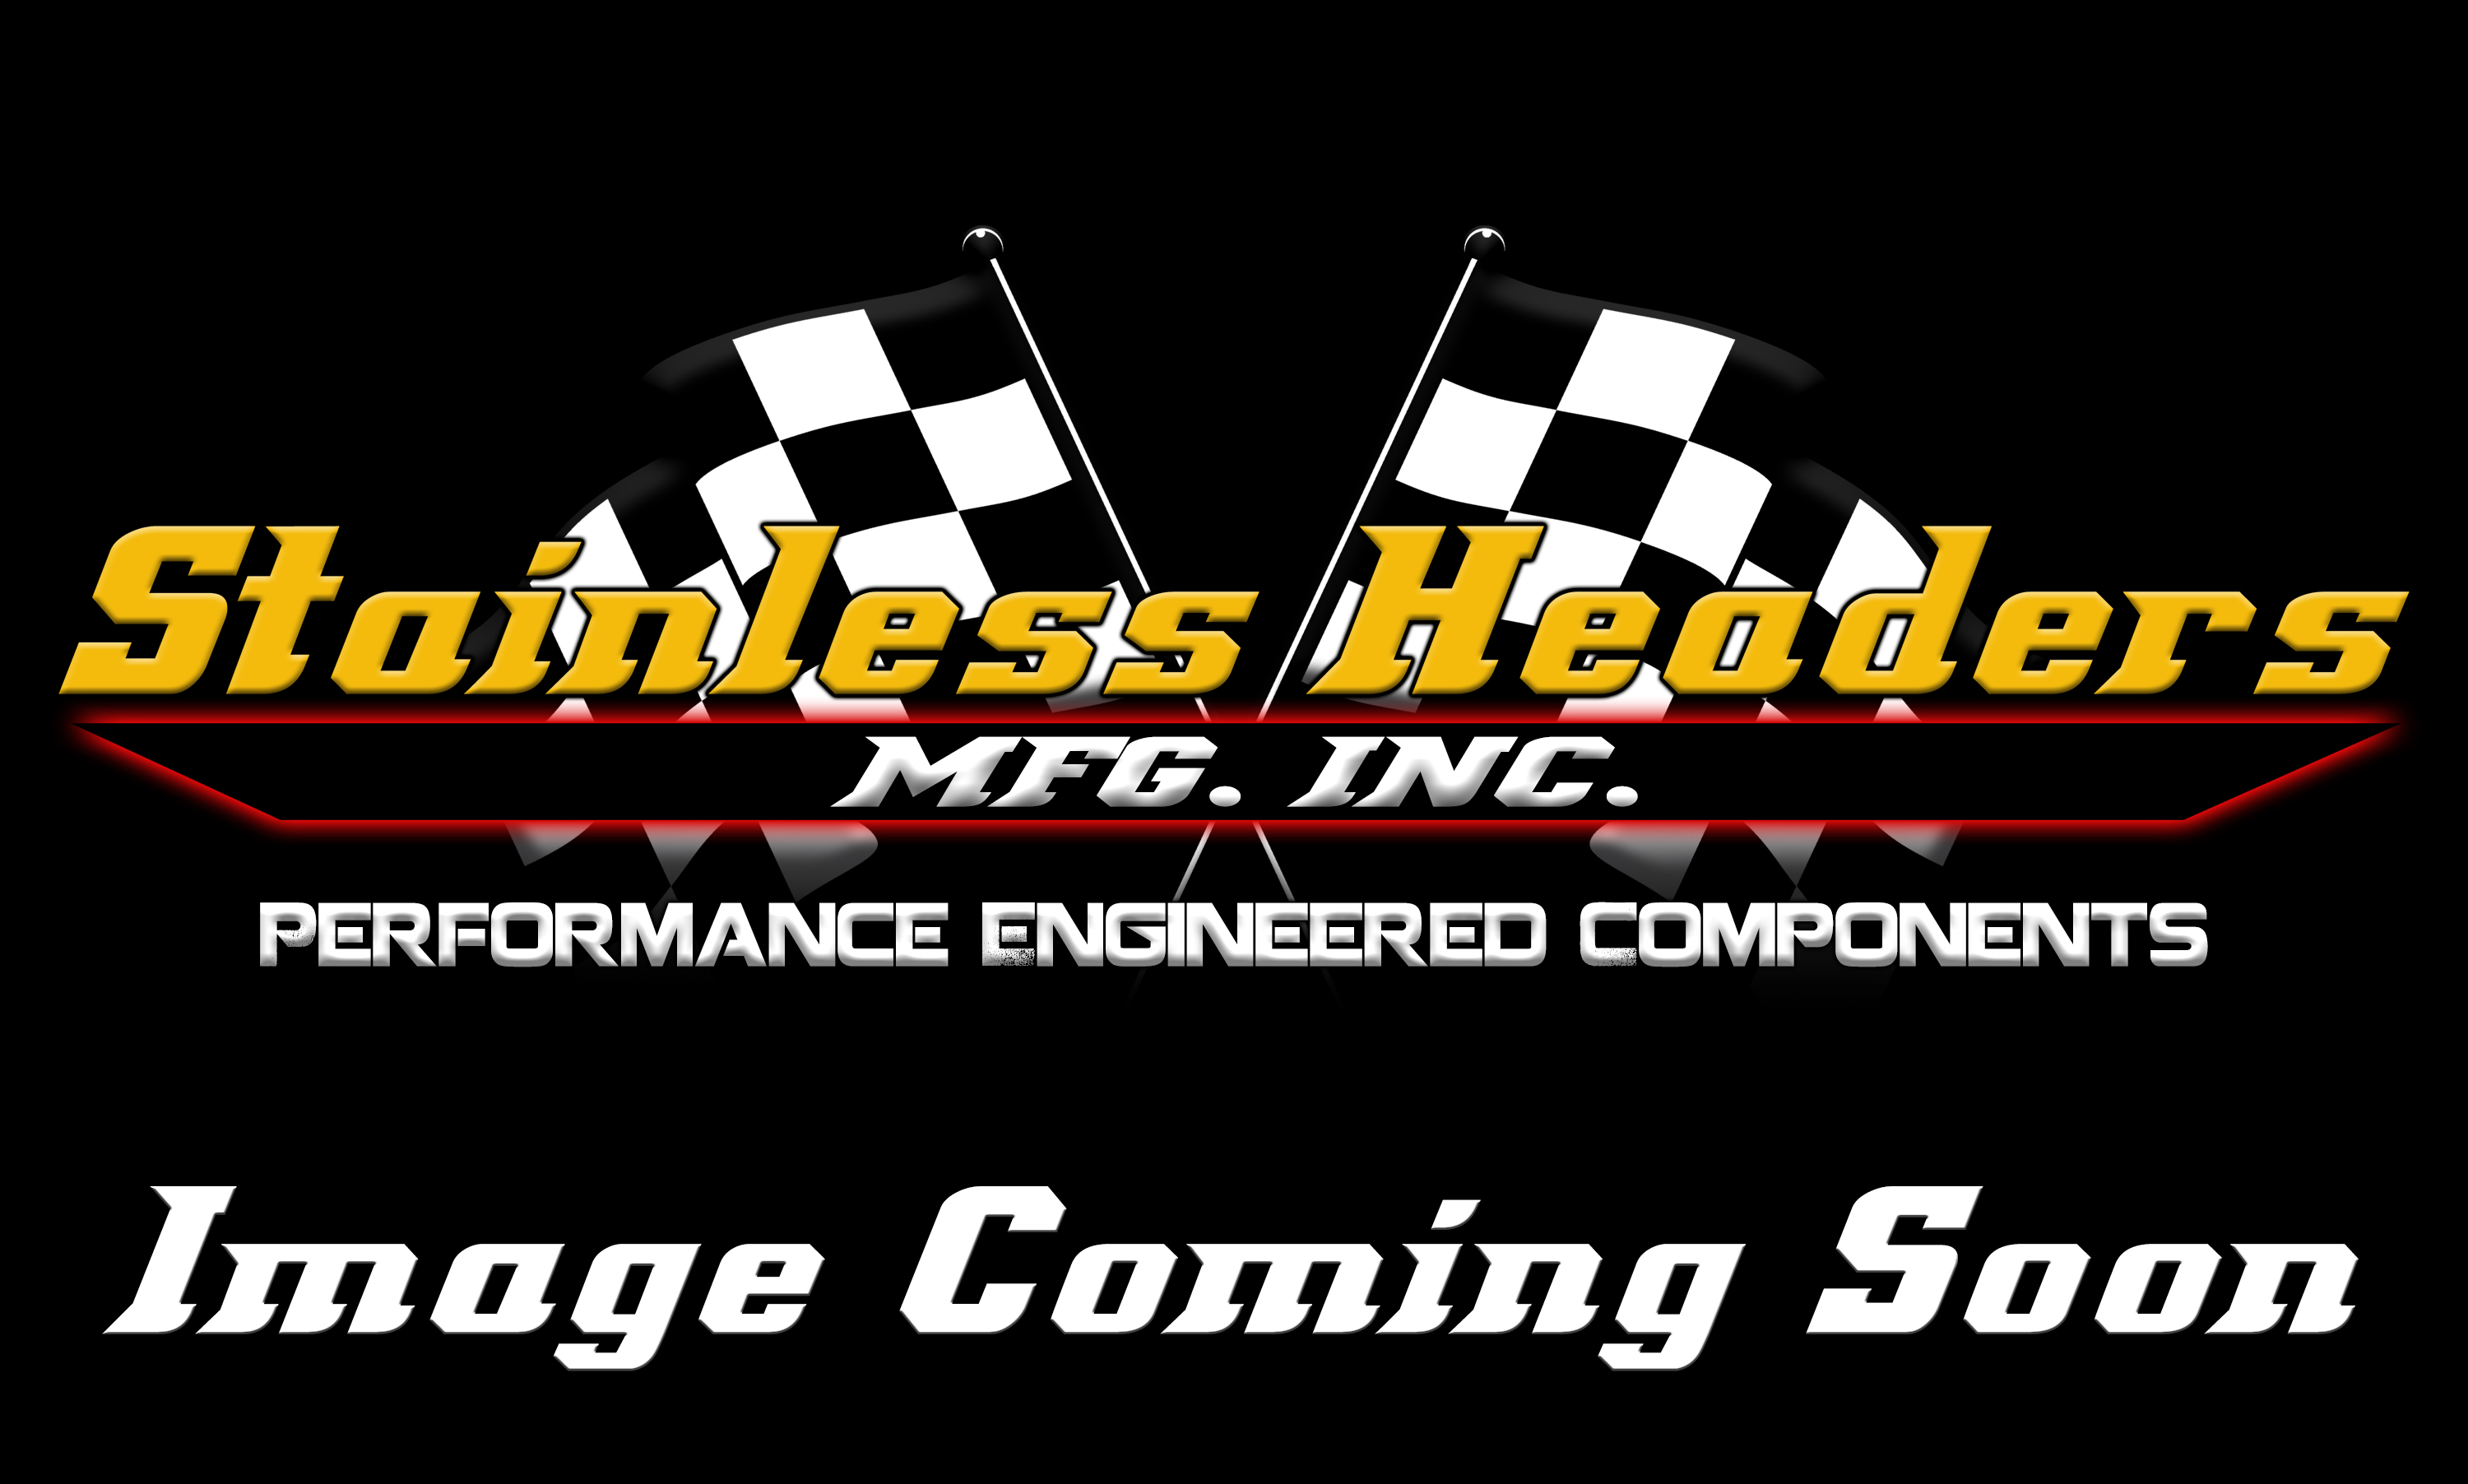 CompTurbo Technologies - CTR4202R-7485 Mid Frame Air-Cooled 1.0  Turbocharger (1300 HP)